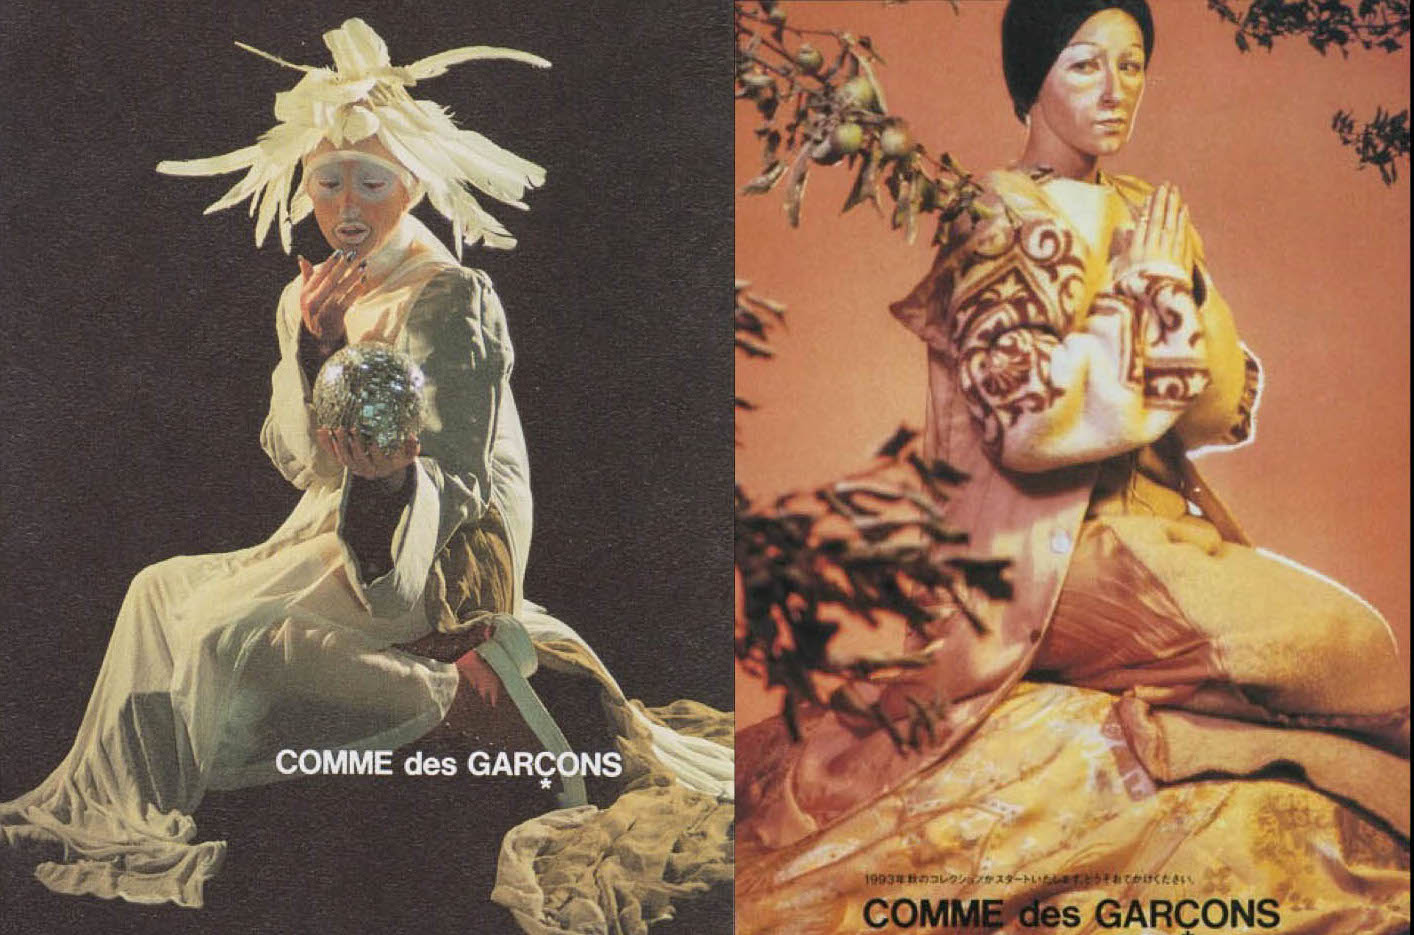 Everything you need to know about Comme des Garçons